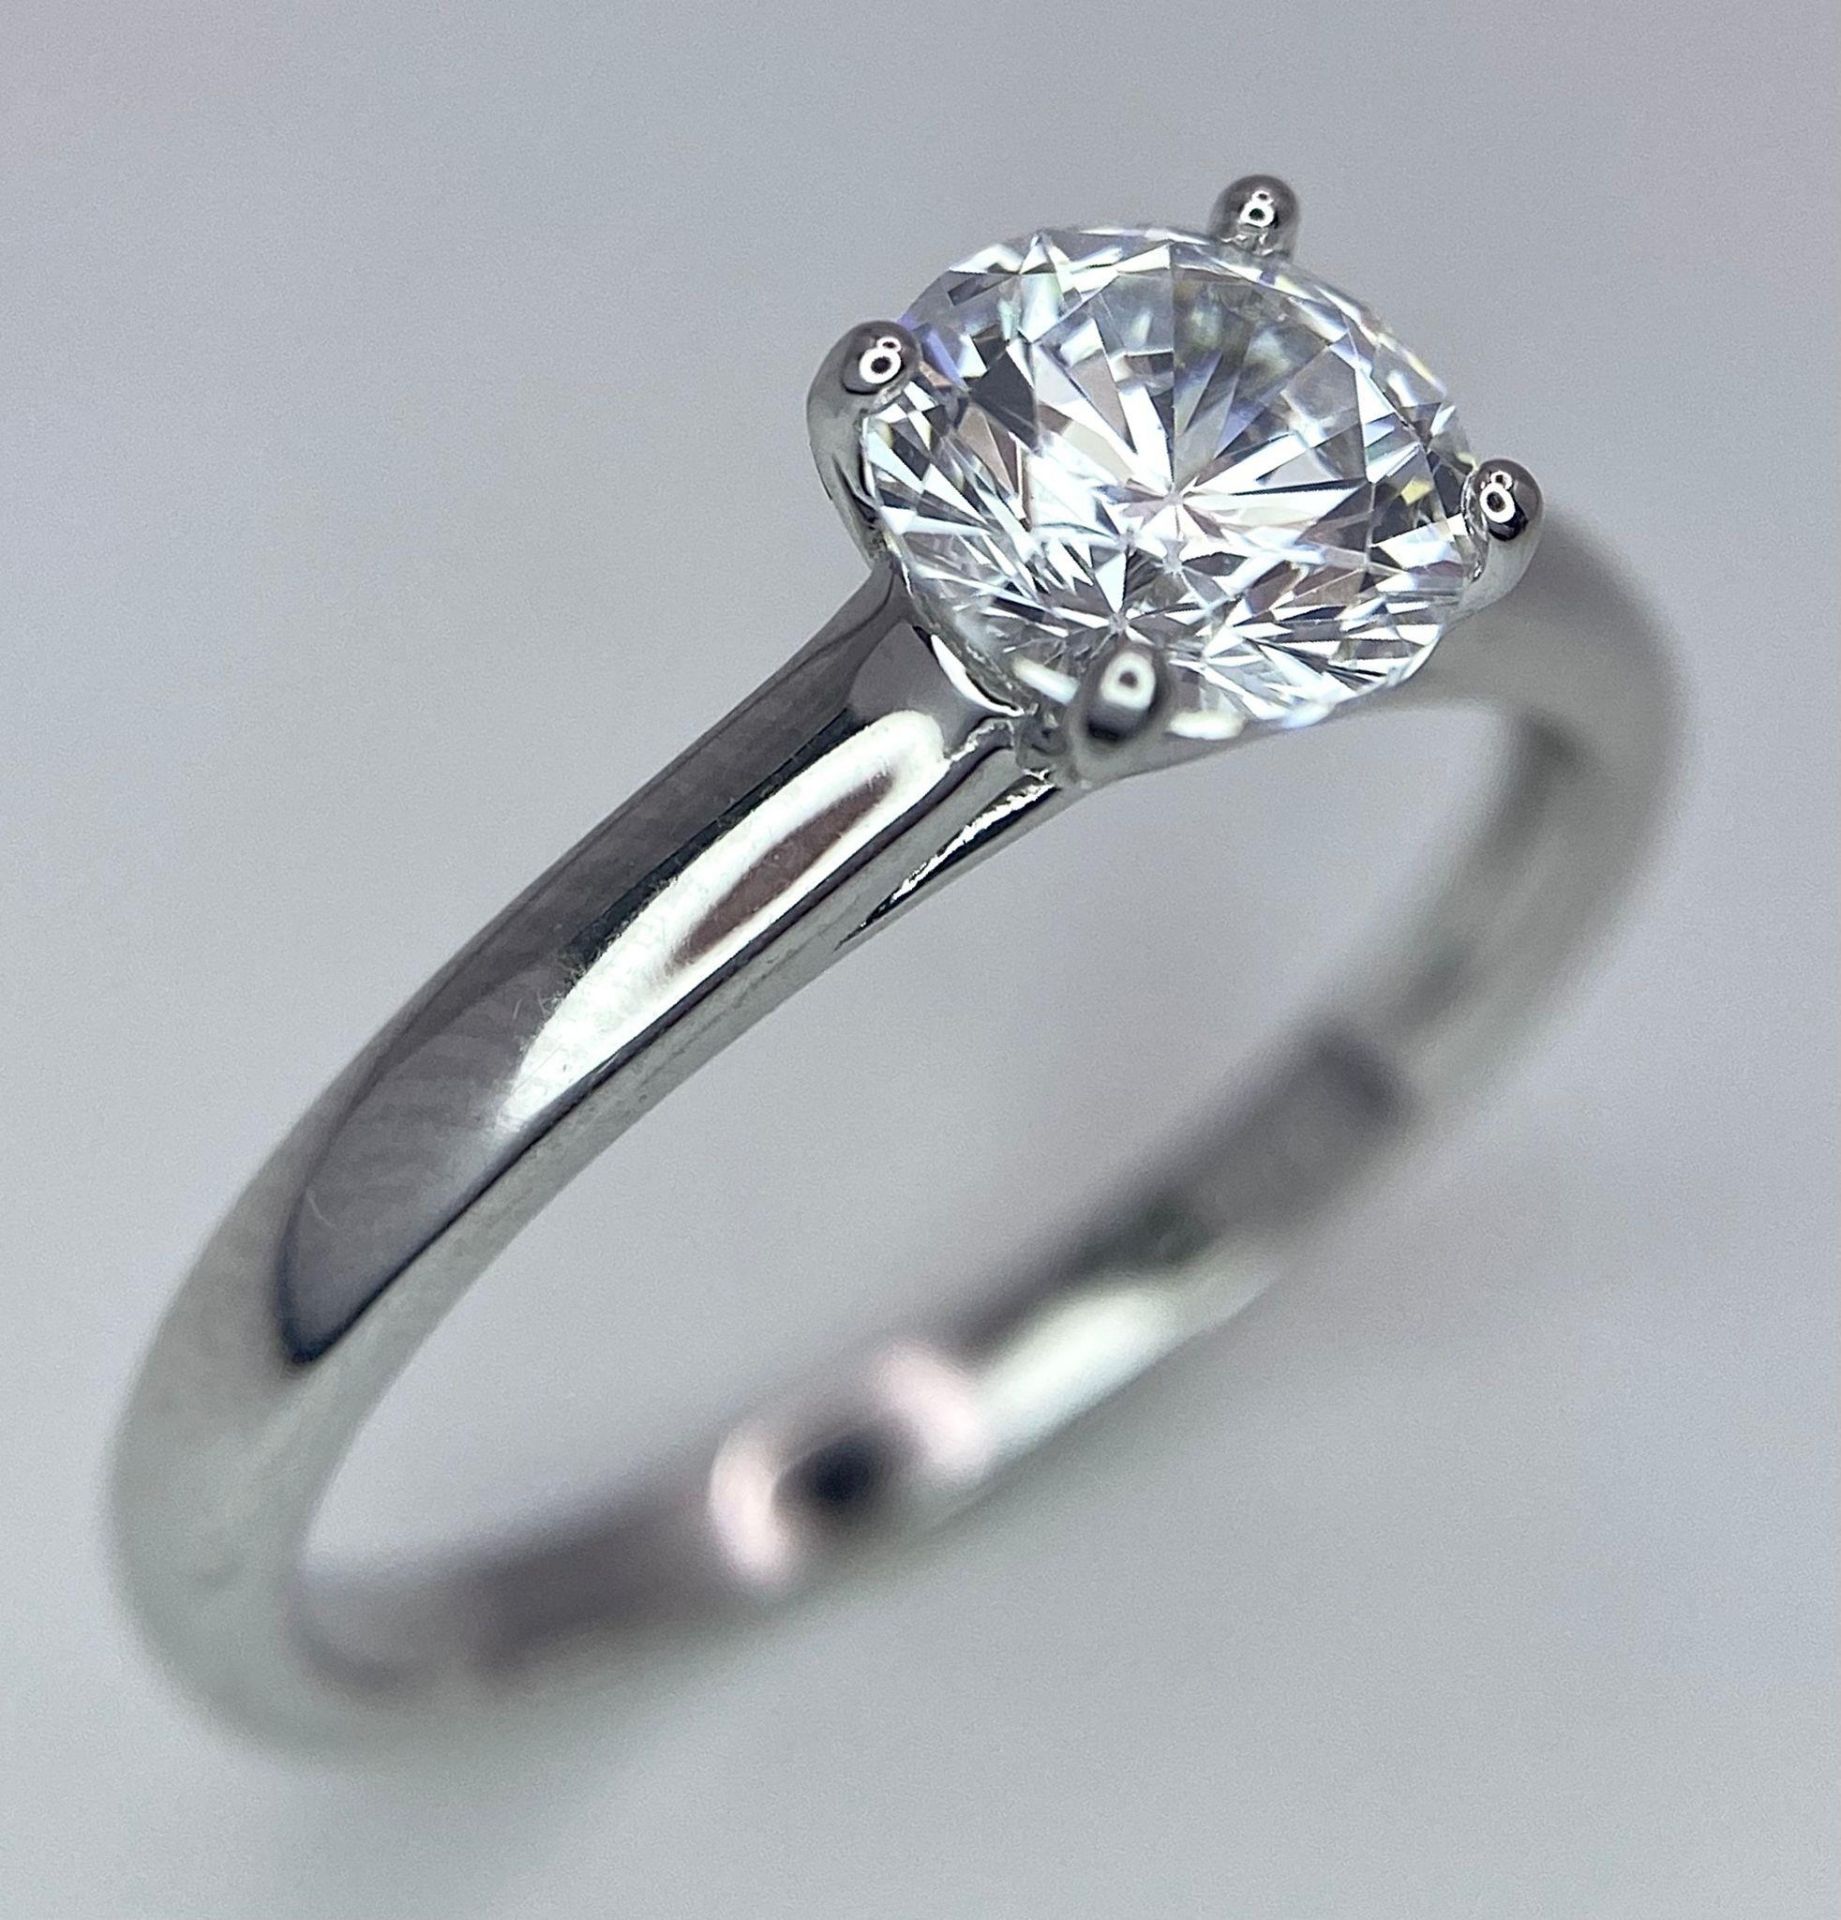 A sterling silver solitaire ring with a round cut cubic zirconium. Size: N, weight: 2 g.